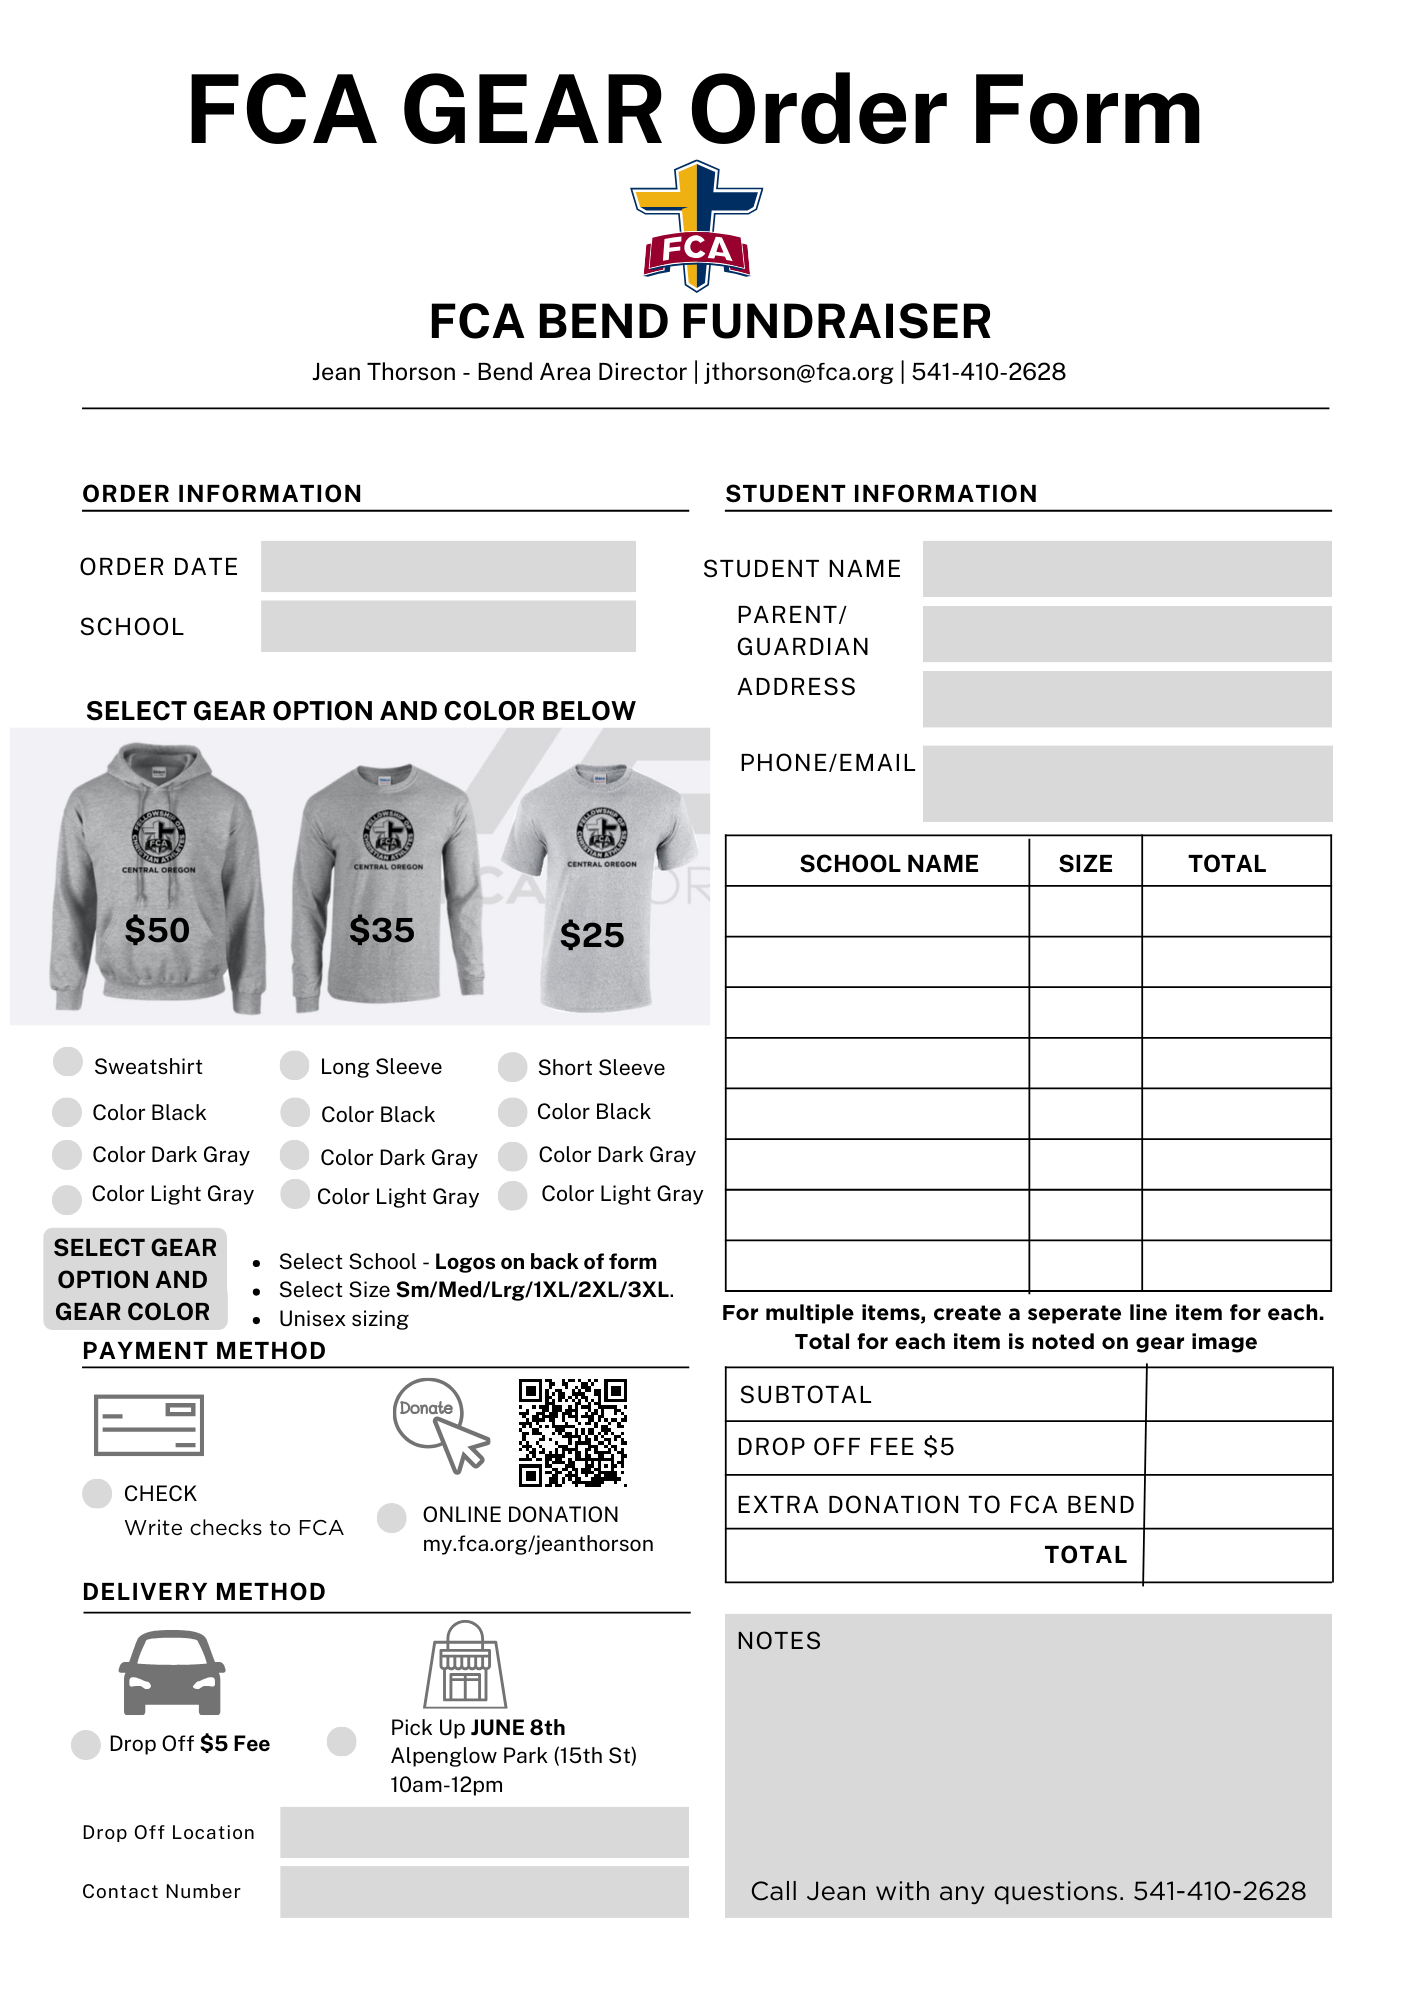 Support FCA Bend and purchase your school FCA Gear. Proceeds will support resources for huddles. 